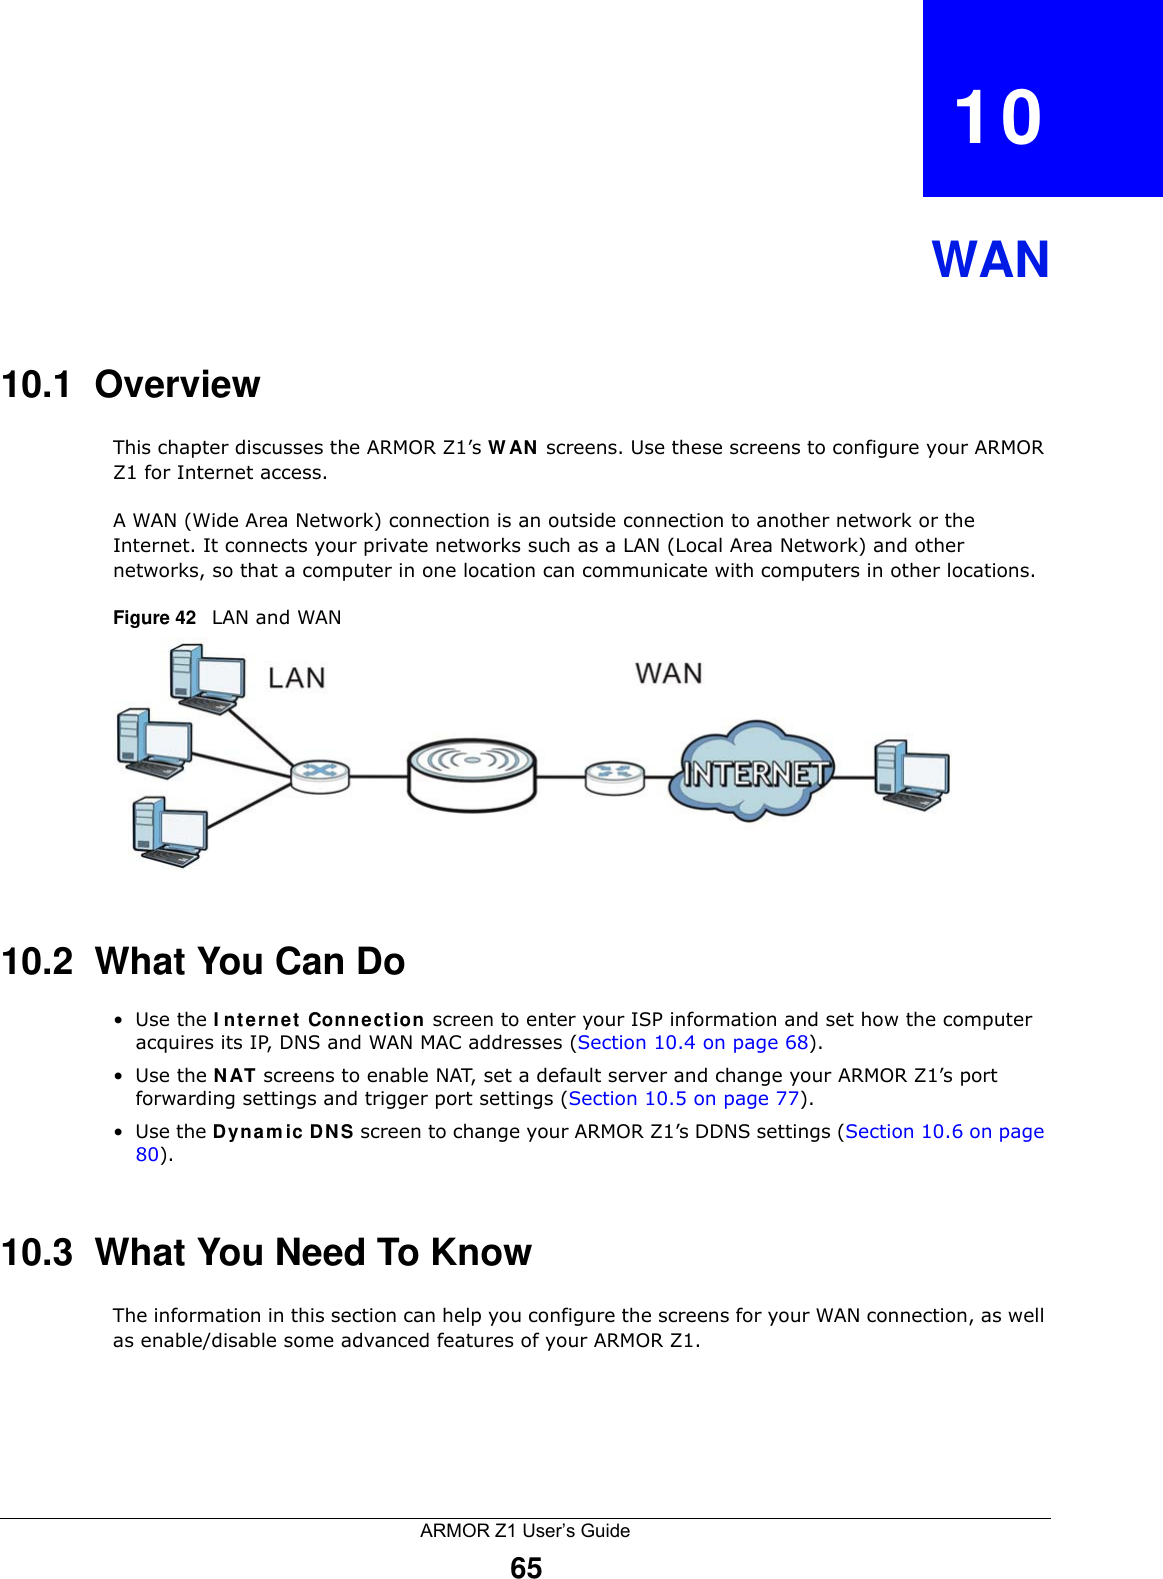 ARMOR Z1 User’s Guide65CHAPTER   10WAN10.1  OverviewThis chapter discusses the ARMOR Z1’s WAN screens. Use these screens to configure your ARMOR Z1 for Internet access.A WAN (Wide Area Network) connection is an outside connection to another network or the Internet. It connects your private networks such as a LAN (Local Area Network) and other networks, so that a computer in one location can communicate with computers in other locations.Figure 42   LAN and WAN10.2  What You Can Do•Use the Internet Connection screen to enter your ISP information and set how the computer acquires its IP, DNS and WAN MAC addresses (Section 10.4 on page 68).•Use the NAT screens to enable NAT, set a default server and change your ARMOR Z1’s port forwarding settings and trigger port settings (Section 10.5 on page 77).•Use the Dynamic DNS screen to change your ARMOR Z1’s DDNS settings (Section 10.6 on page 80).10.3  What You Need To KnowThe information in this section can help you configure the screens for your WAN connection, as well as enable/disable some advanced features of your ARMOR Z1.